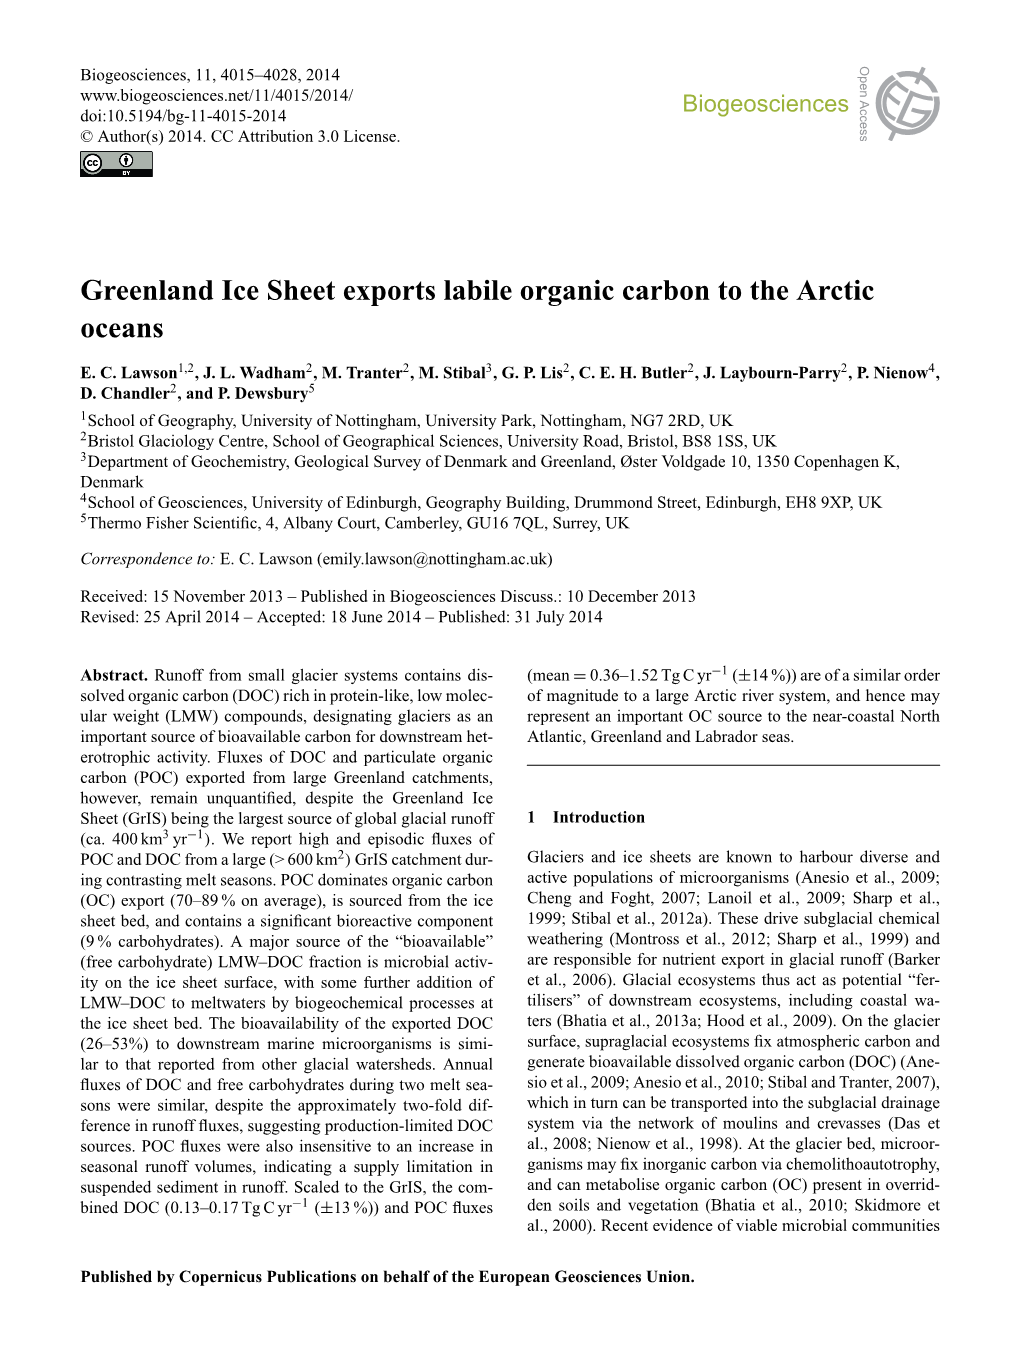 Greenland Ice Sheet Exports Labile Organic Carbon to the Arctic Oceans